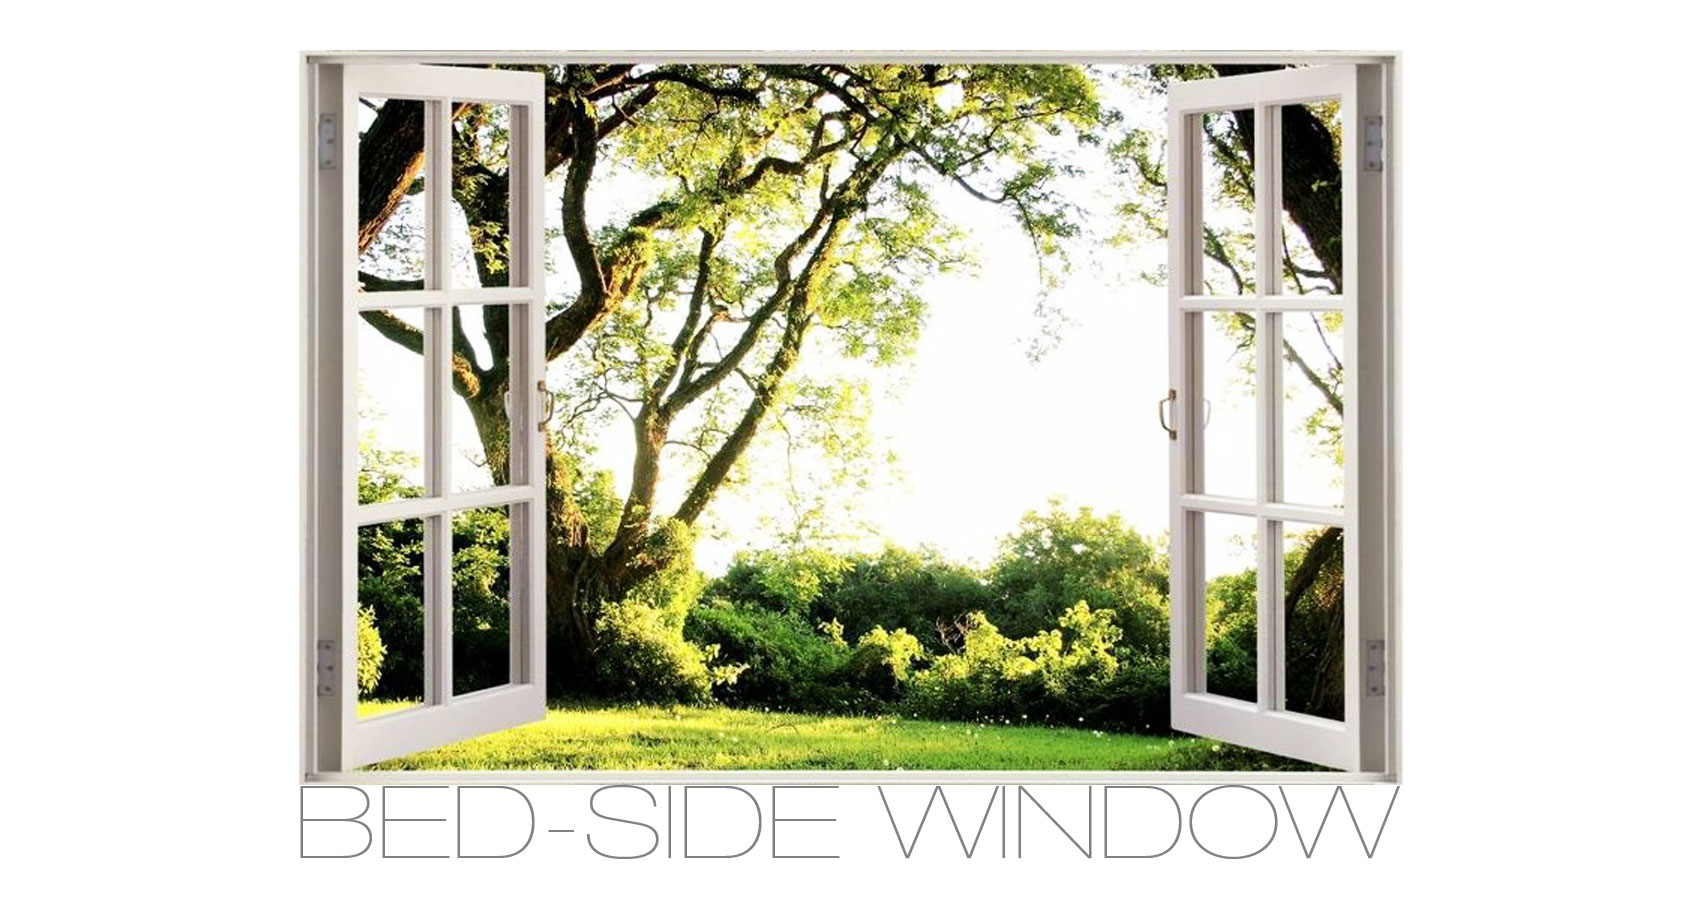 Bed-side Window, written by Jon Manley at Spillwords.com